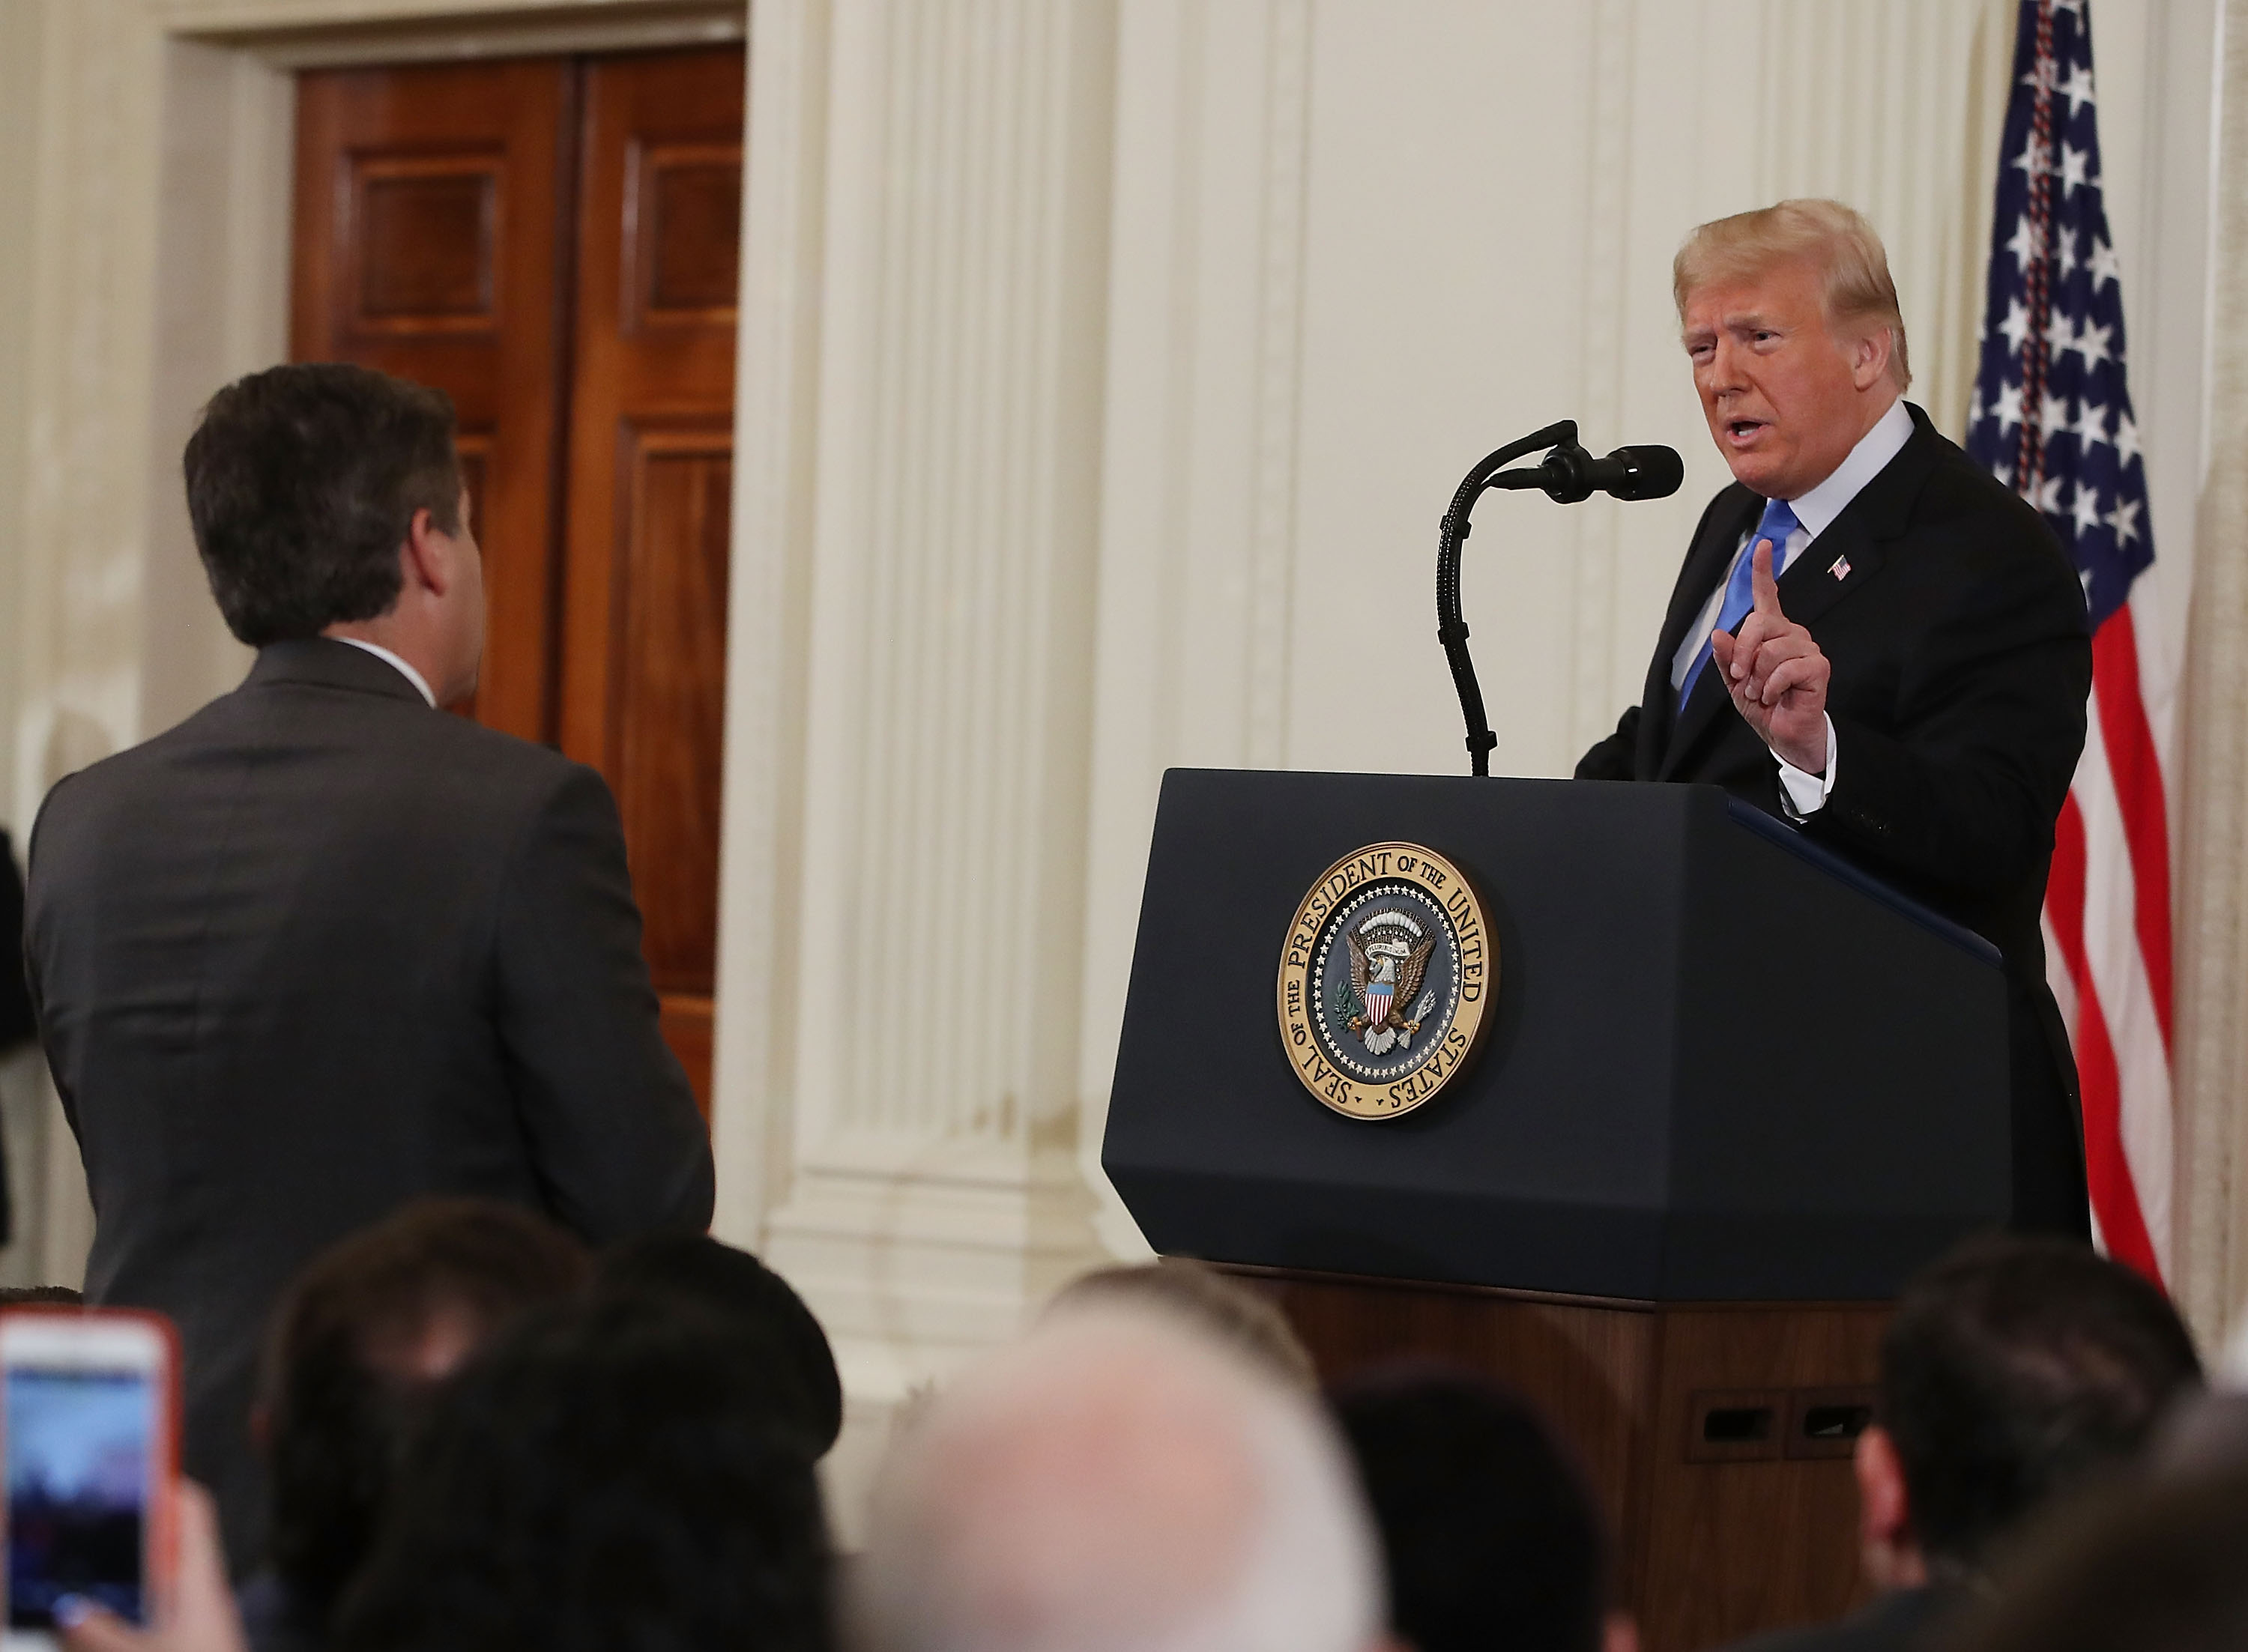 WASHINGTON, DC - NOVEMBER 07: U.S. President Donald Trump gets into an exchange with Jim Acosta of CNN after giving remarks a day after the midterm elections on November 7, 2018 in the East Room of the White House in Washington, DC. Republicans kept the Senate majority but lost control of the House to the Democrats. (Photo by Mark Wilson/Getty Images)